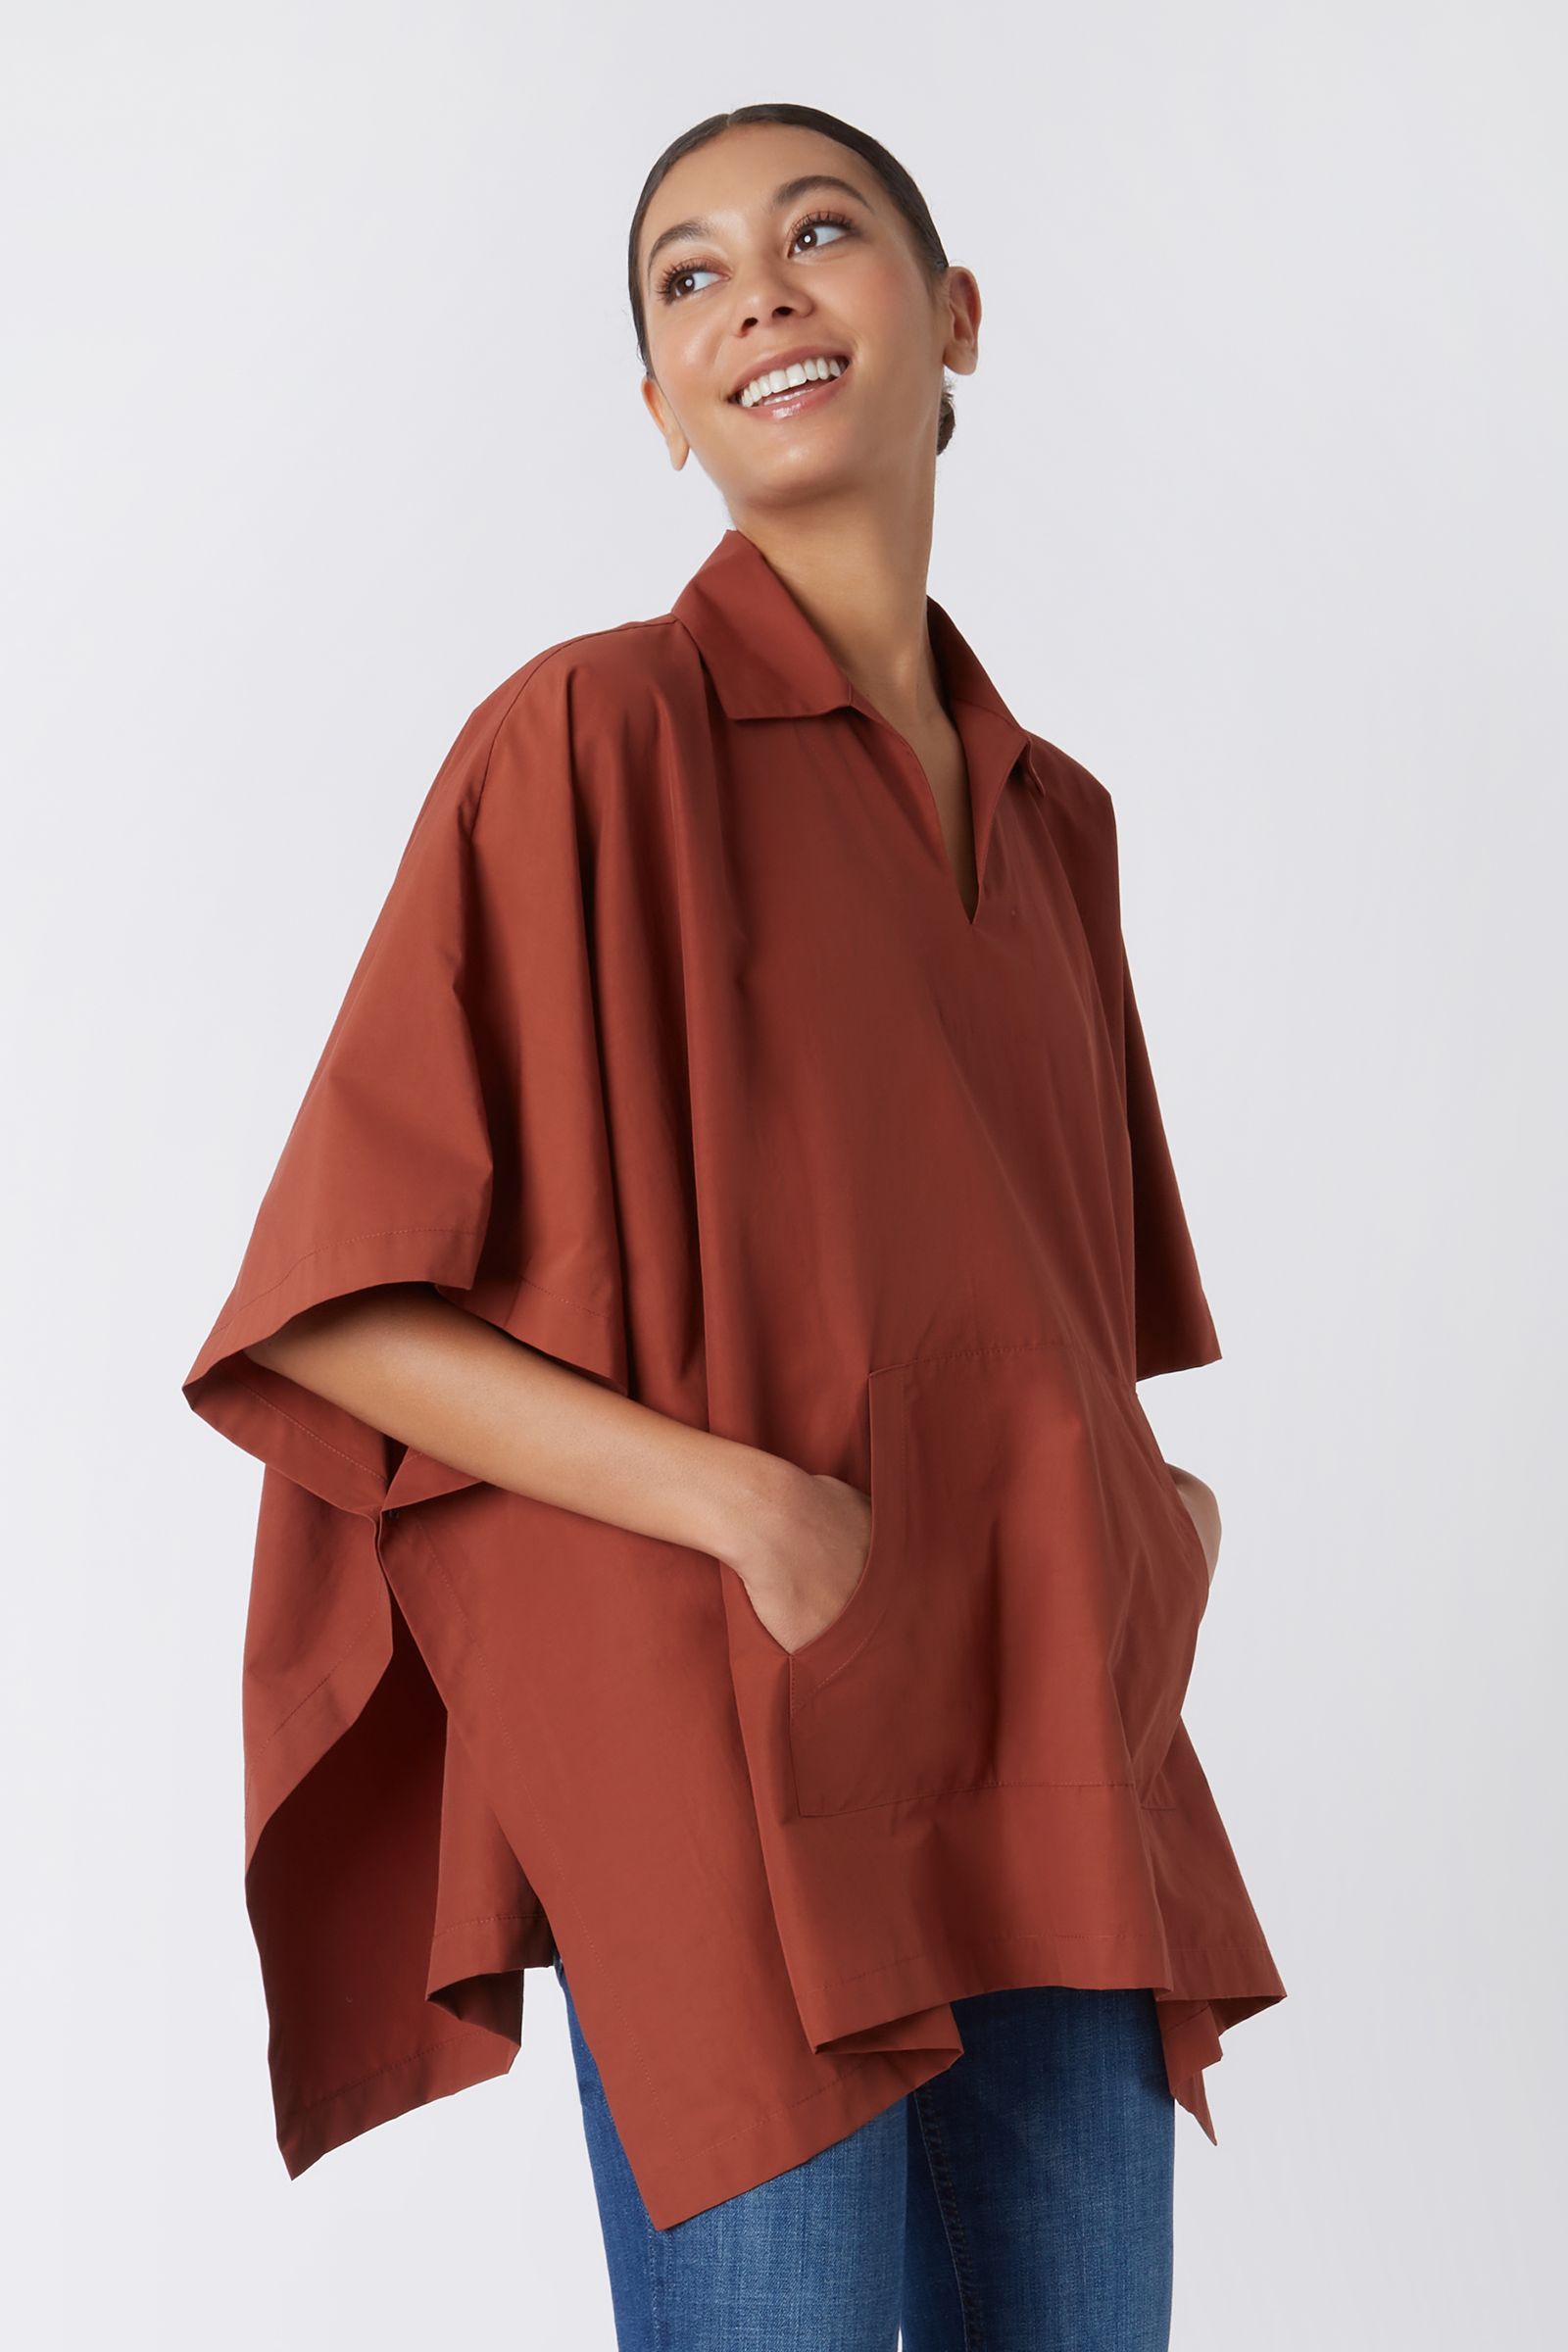 Kal Rieman Pocket Poncho in Rust Italian Broadcloth on Model with Hands in Pockets Cropped Side View